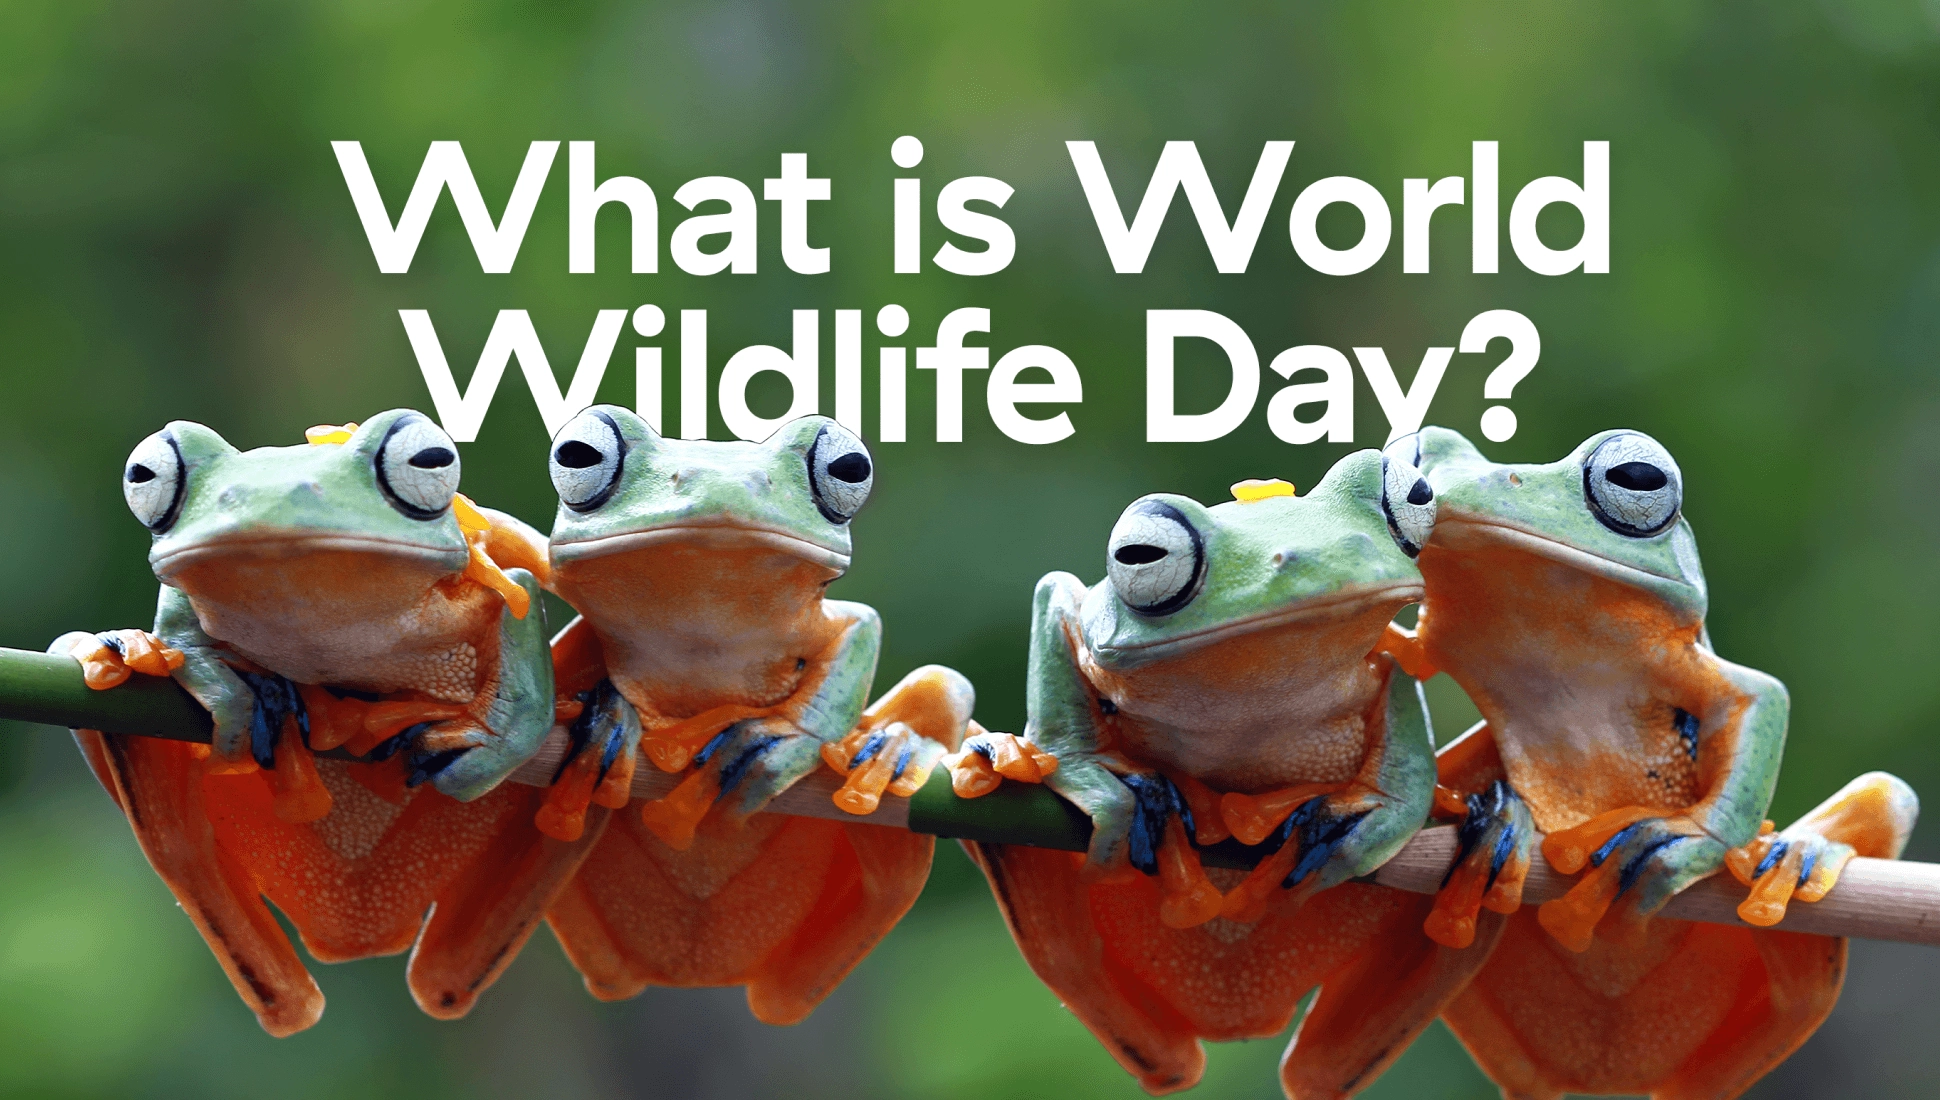 What is World Wildlife Day and why does it matter?